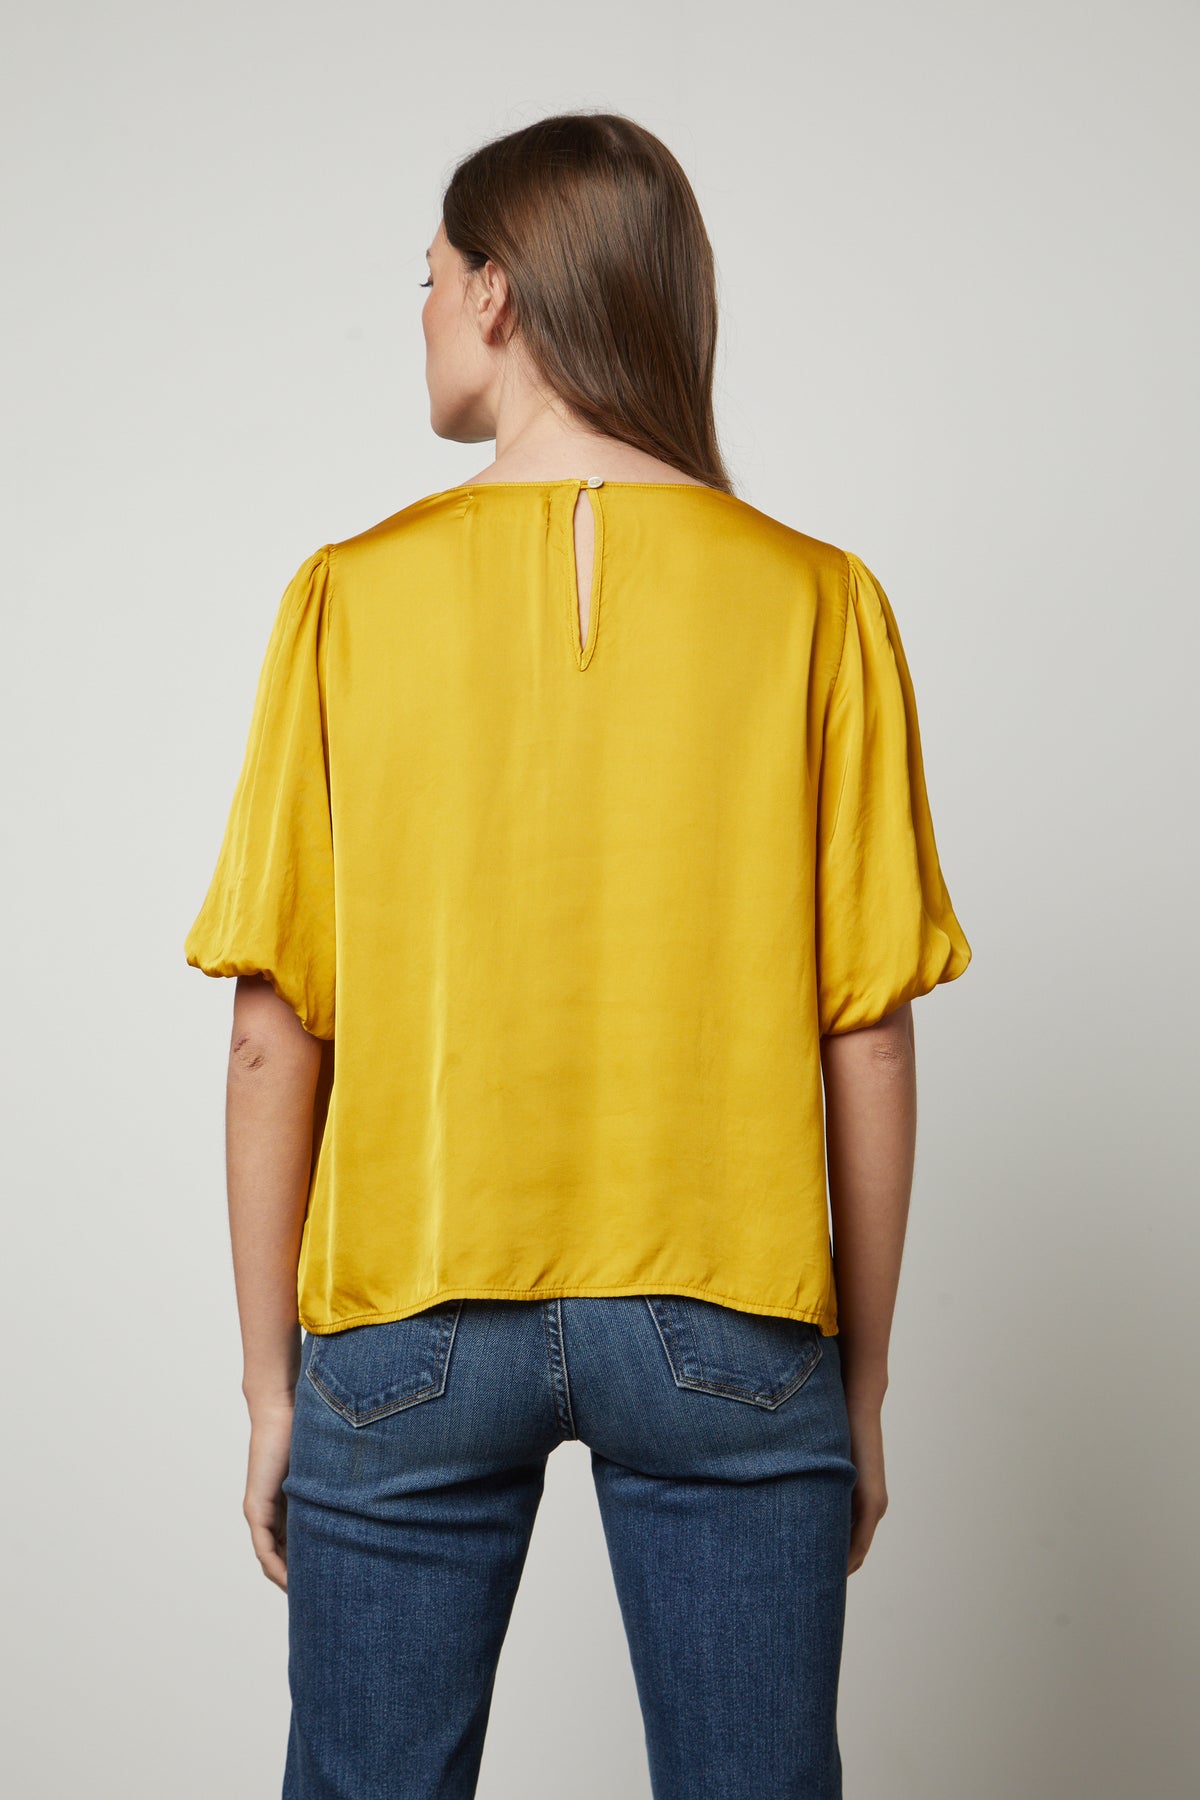 The back view of a woman wearing the Velvet by Graham & Spencer DESI SATIN PUFF SLEEVE TOP.-35656169488577